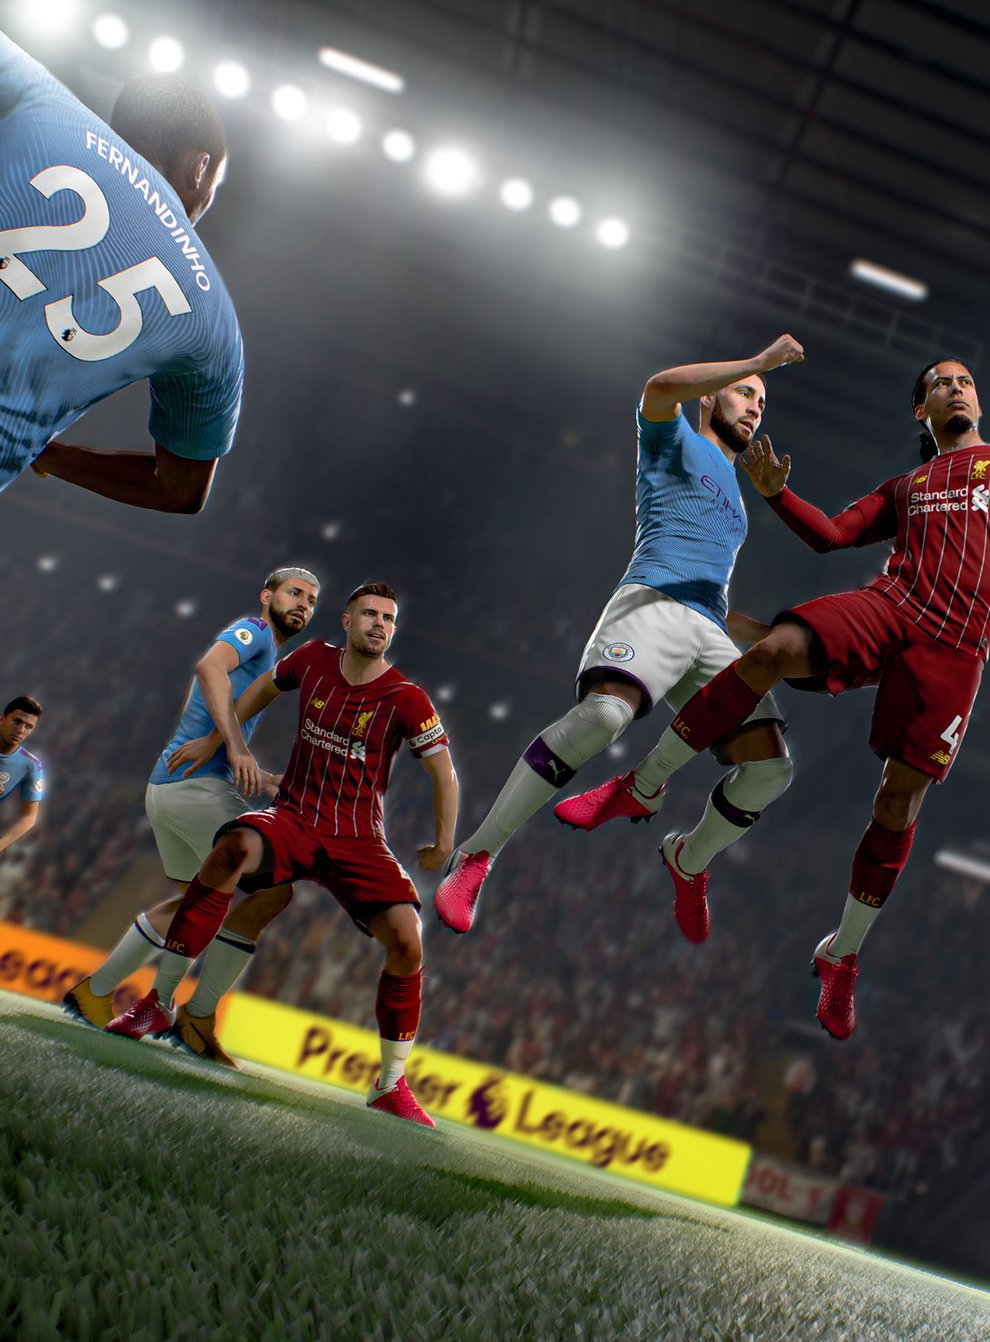 FIFA 21 will be officially released on October 9